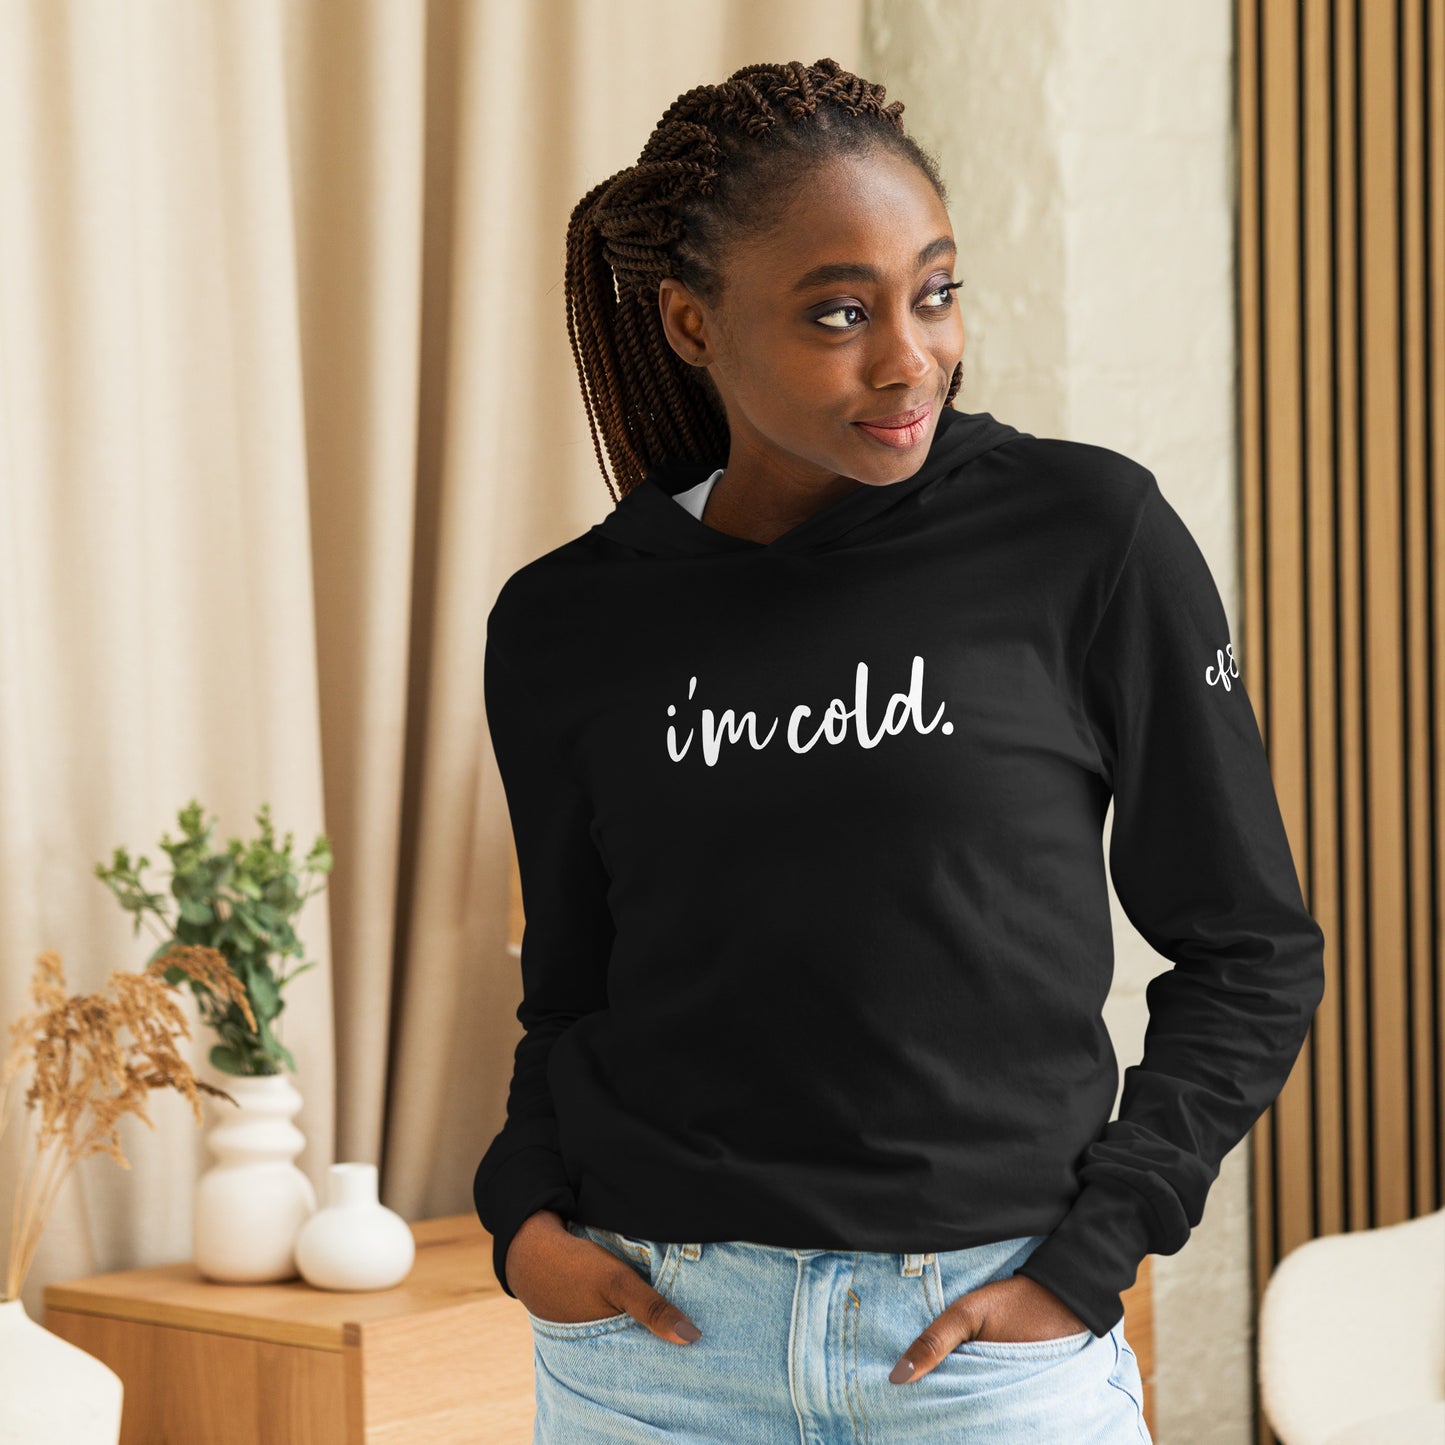 I'm cold. Hooded long-sleeve tee